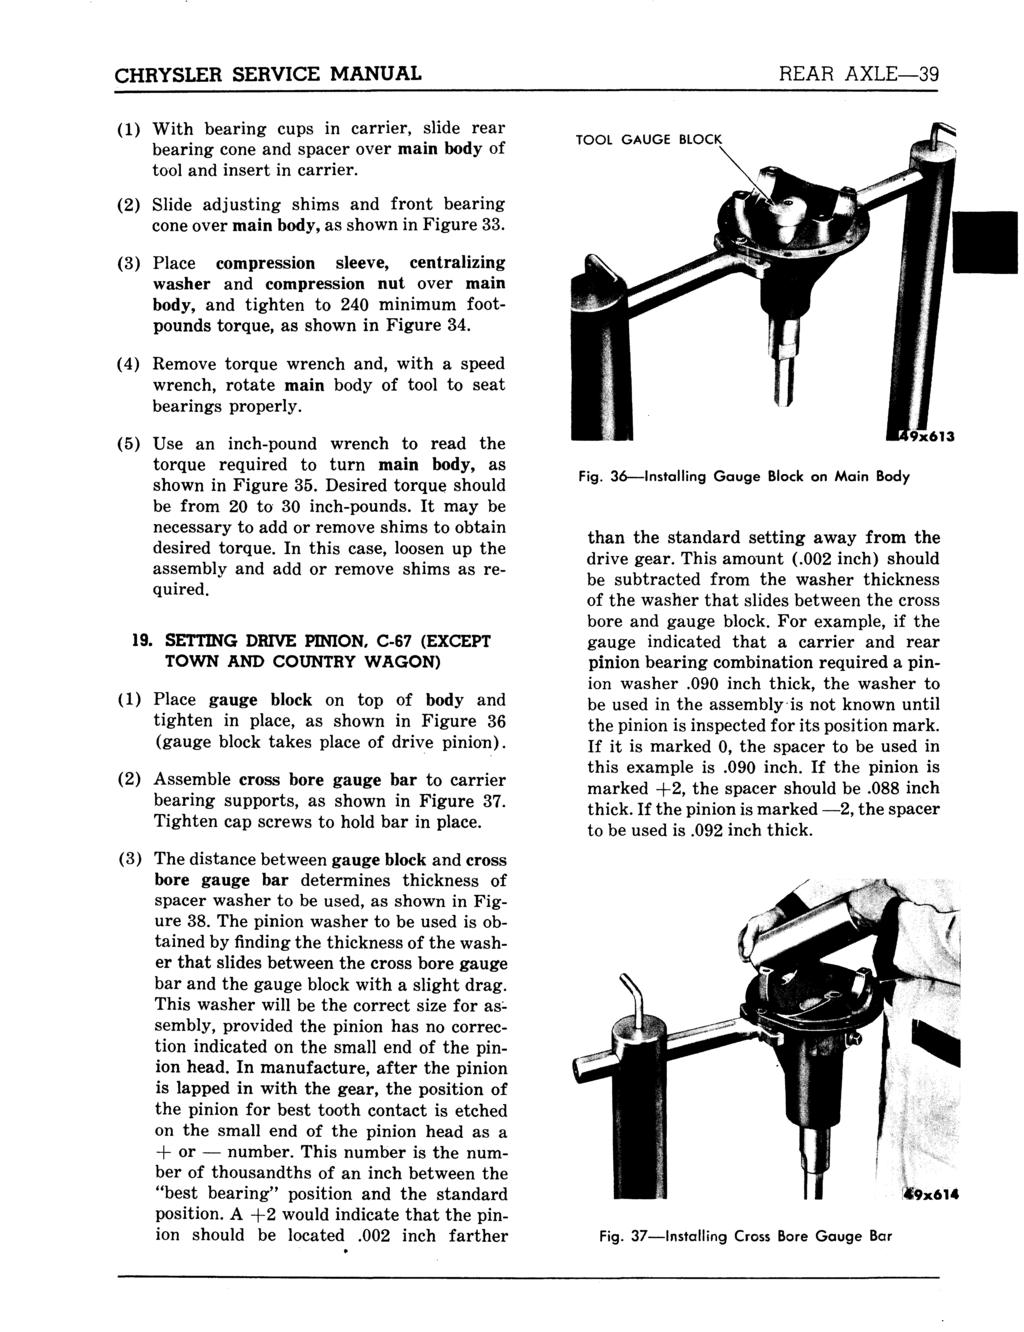 CHRYSLER SERVICE MANUAL (1) With bearing cups in carrier, slide rear bearing cone and spacer over main body of tool and insert in carrier.